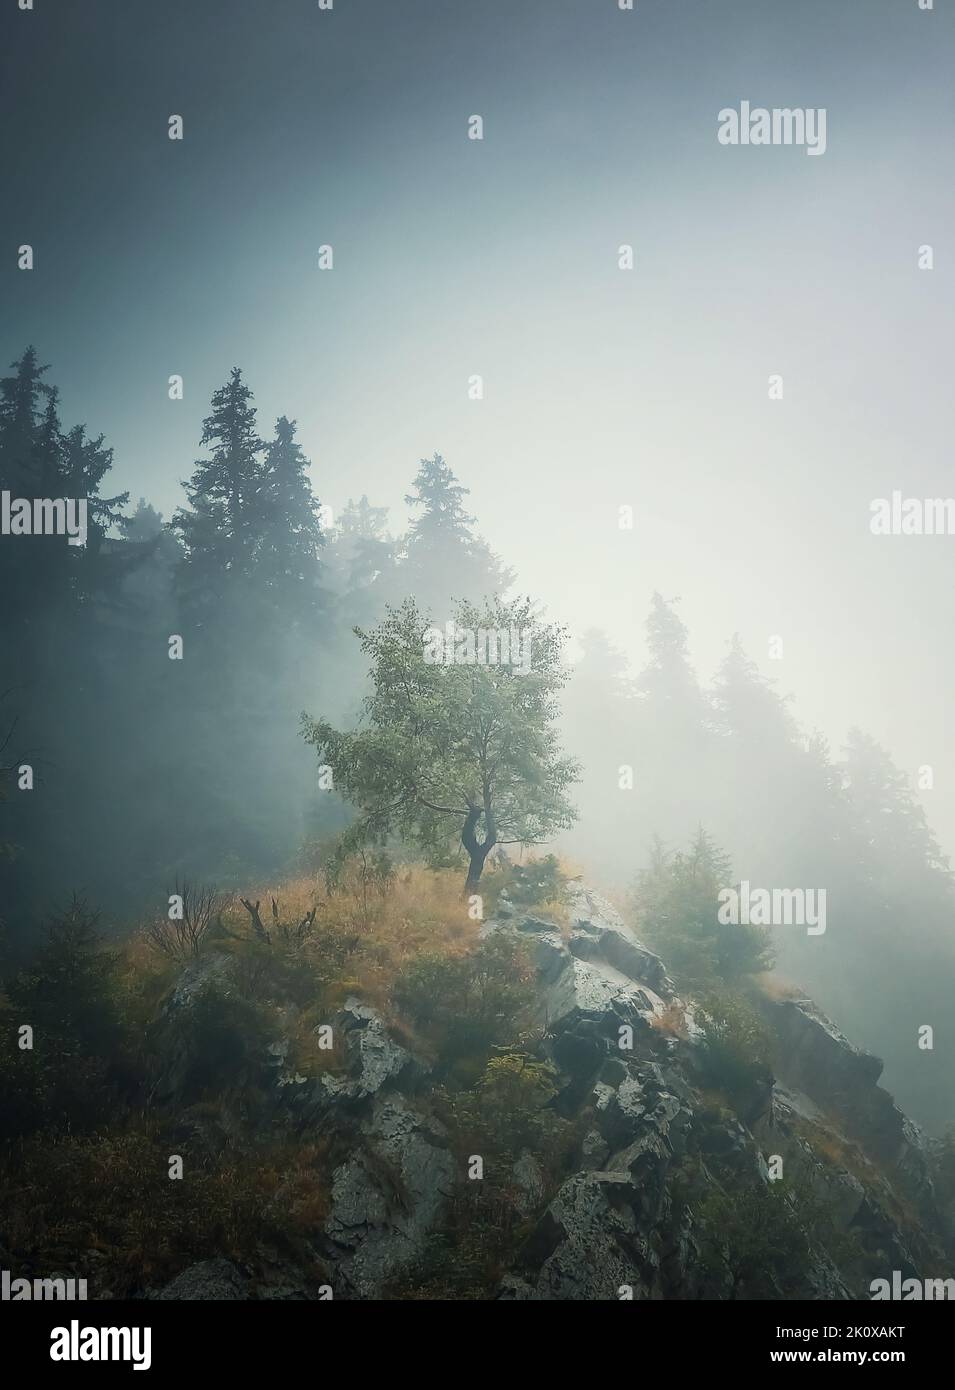 Solitary tree on the top of a hill surrounded by dense mist and a fir forest on the background. Beautiful and moody autumnal scene in Carpathian mount Stock Photo